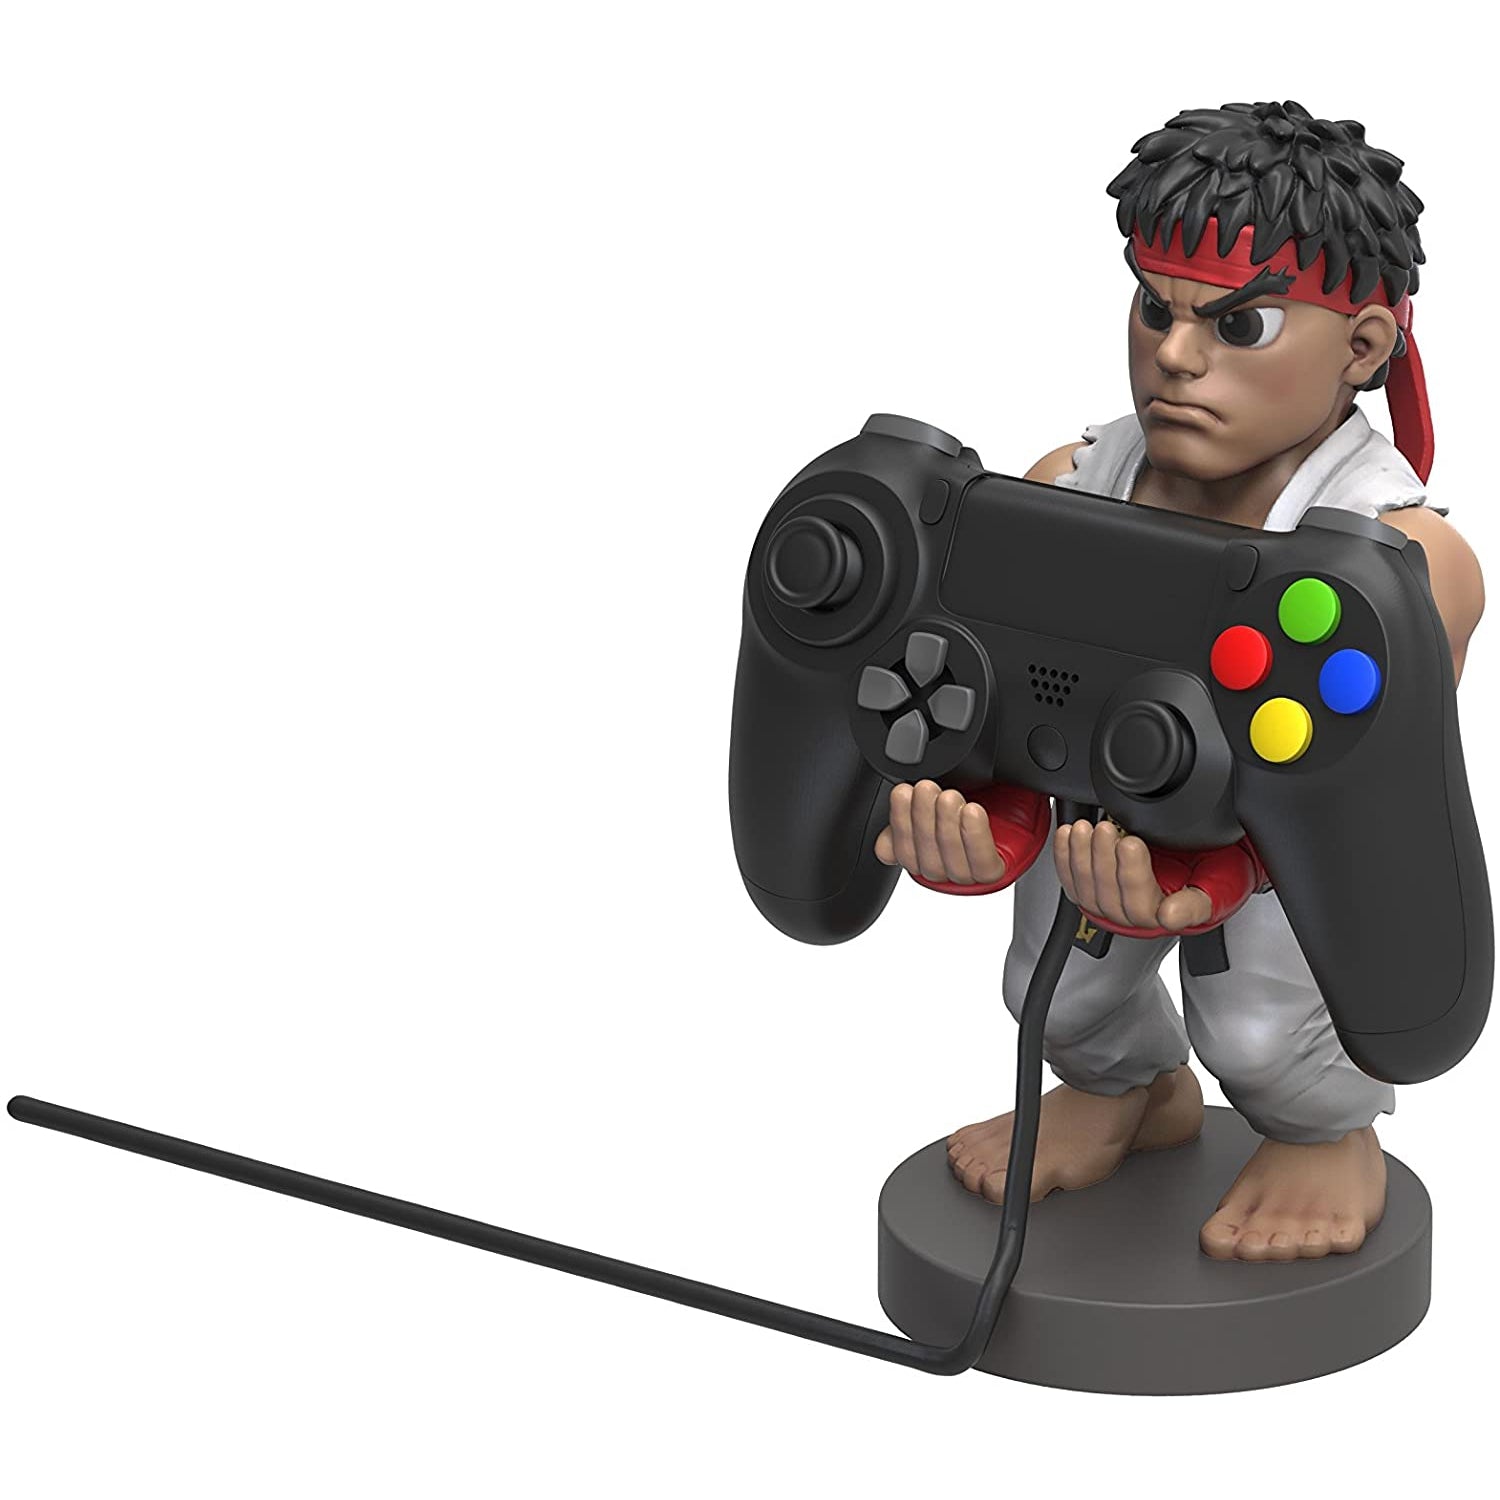 Cable Guy Street Fighter Ryu Device Holder